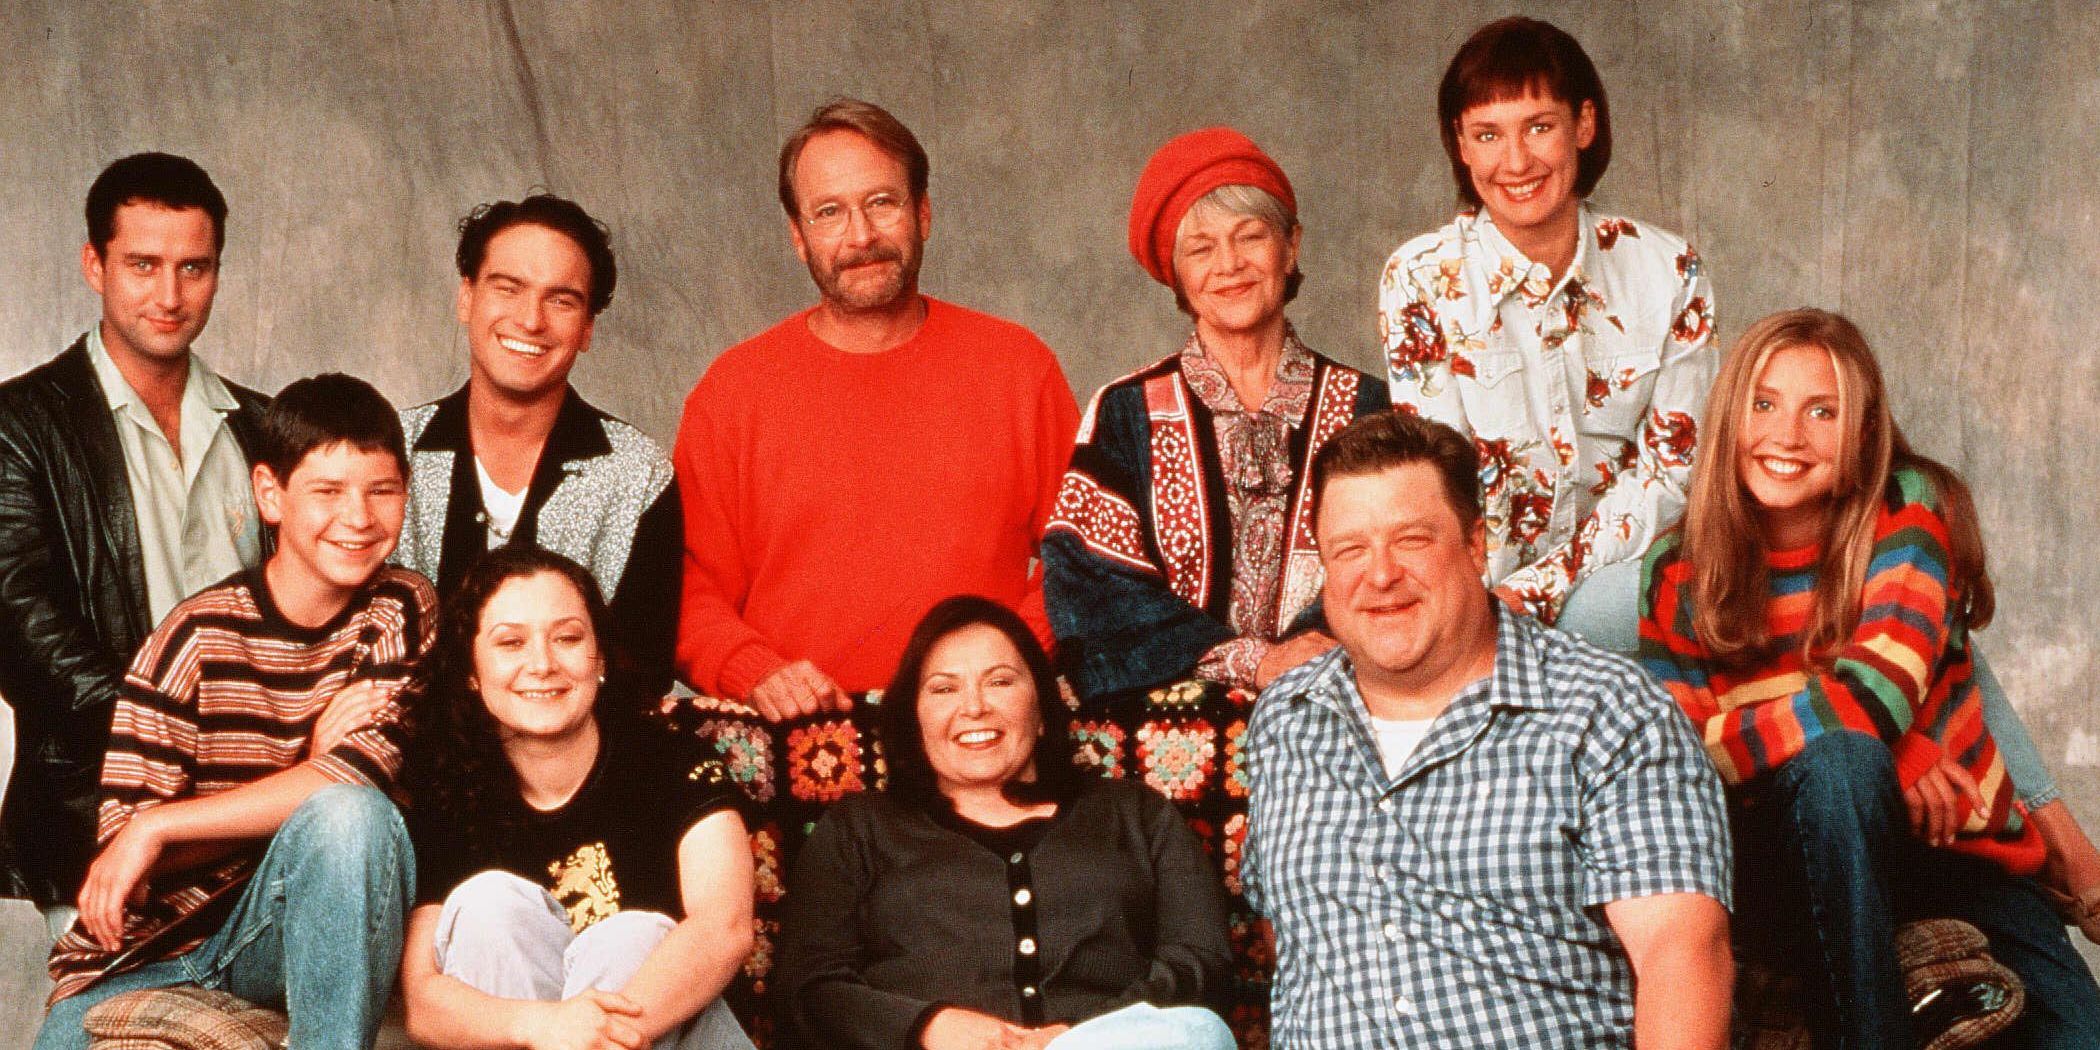 The main cast of Roseanne, The Conners, and their respective families